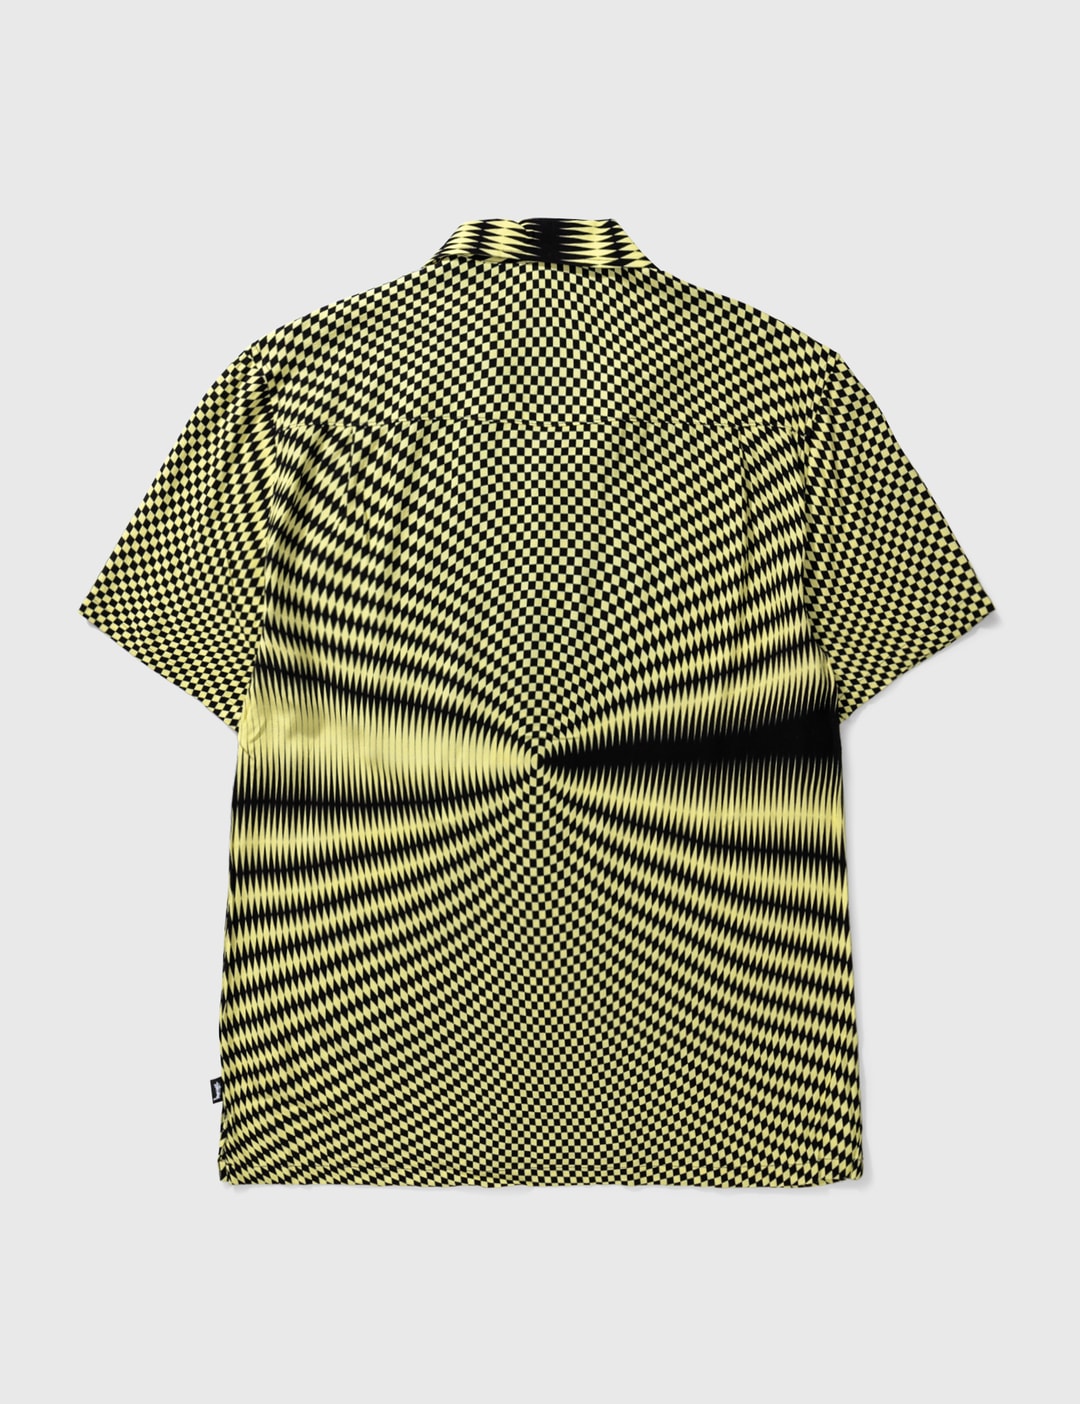 Stüssy - Psychedelic Check Shirt | HBX - Globally Curated Fashion and ...